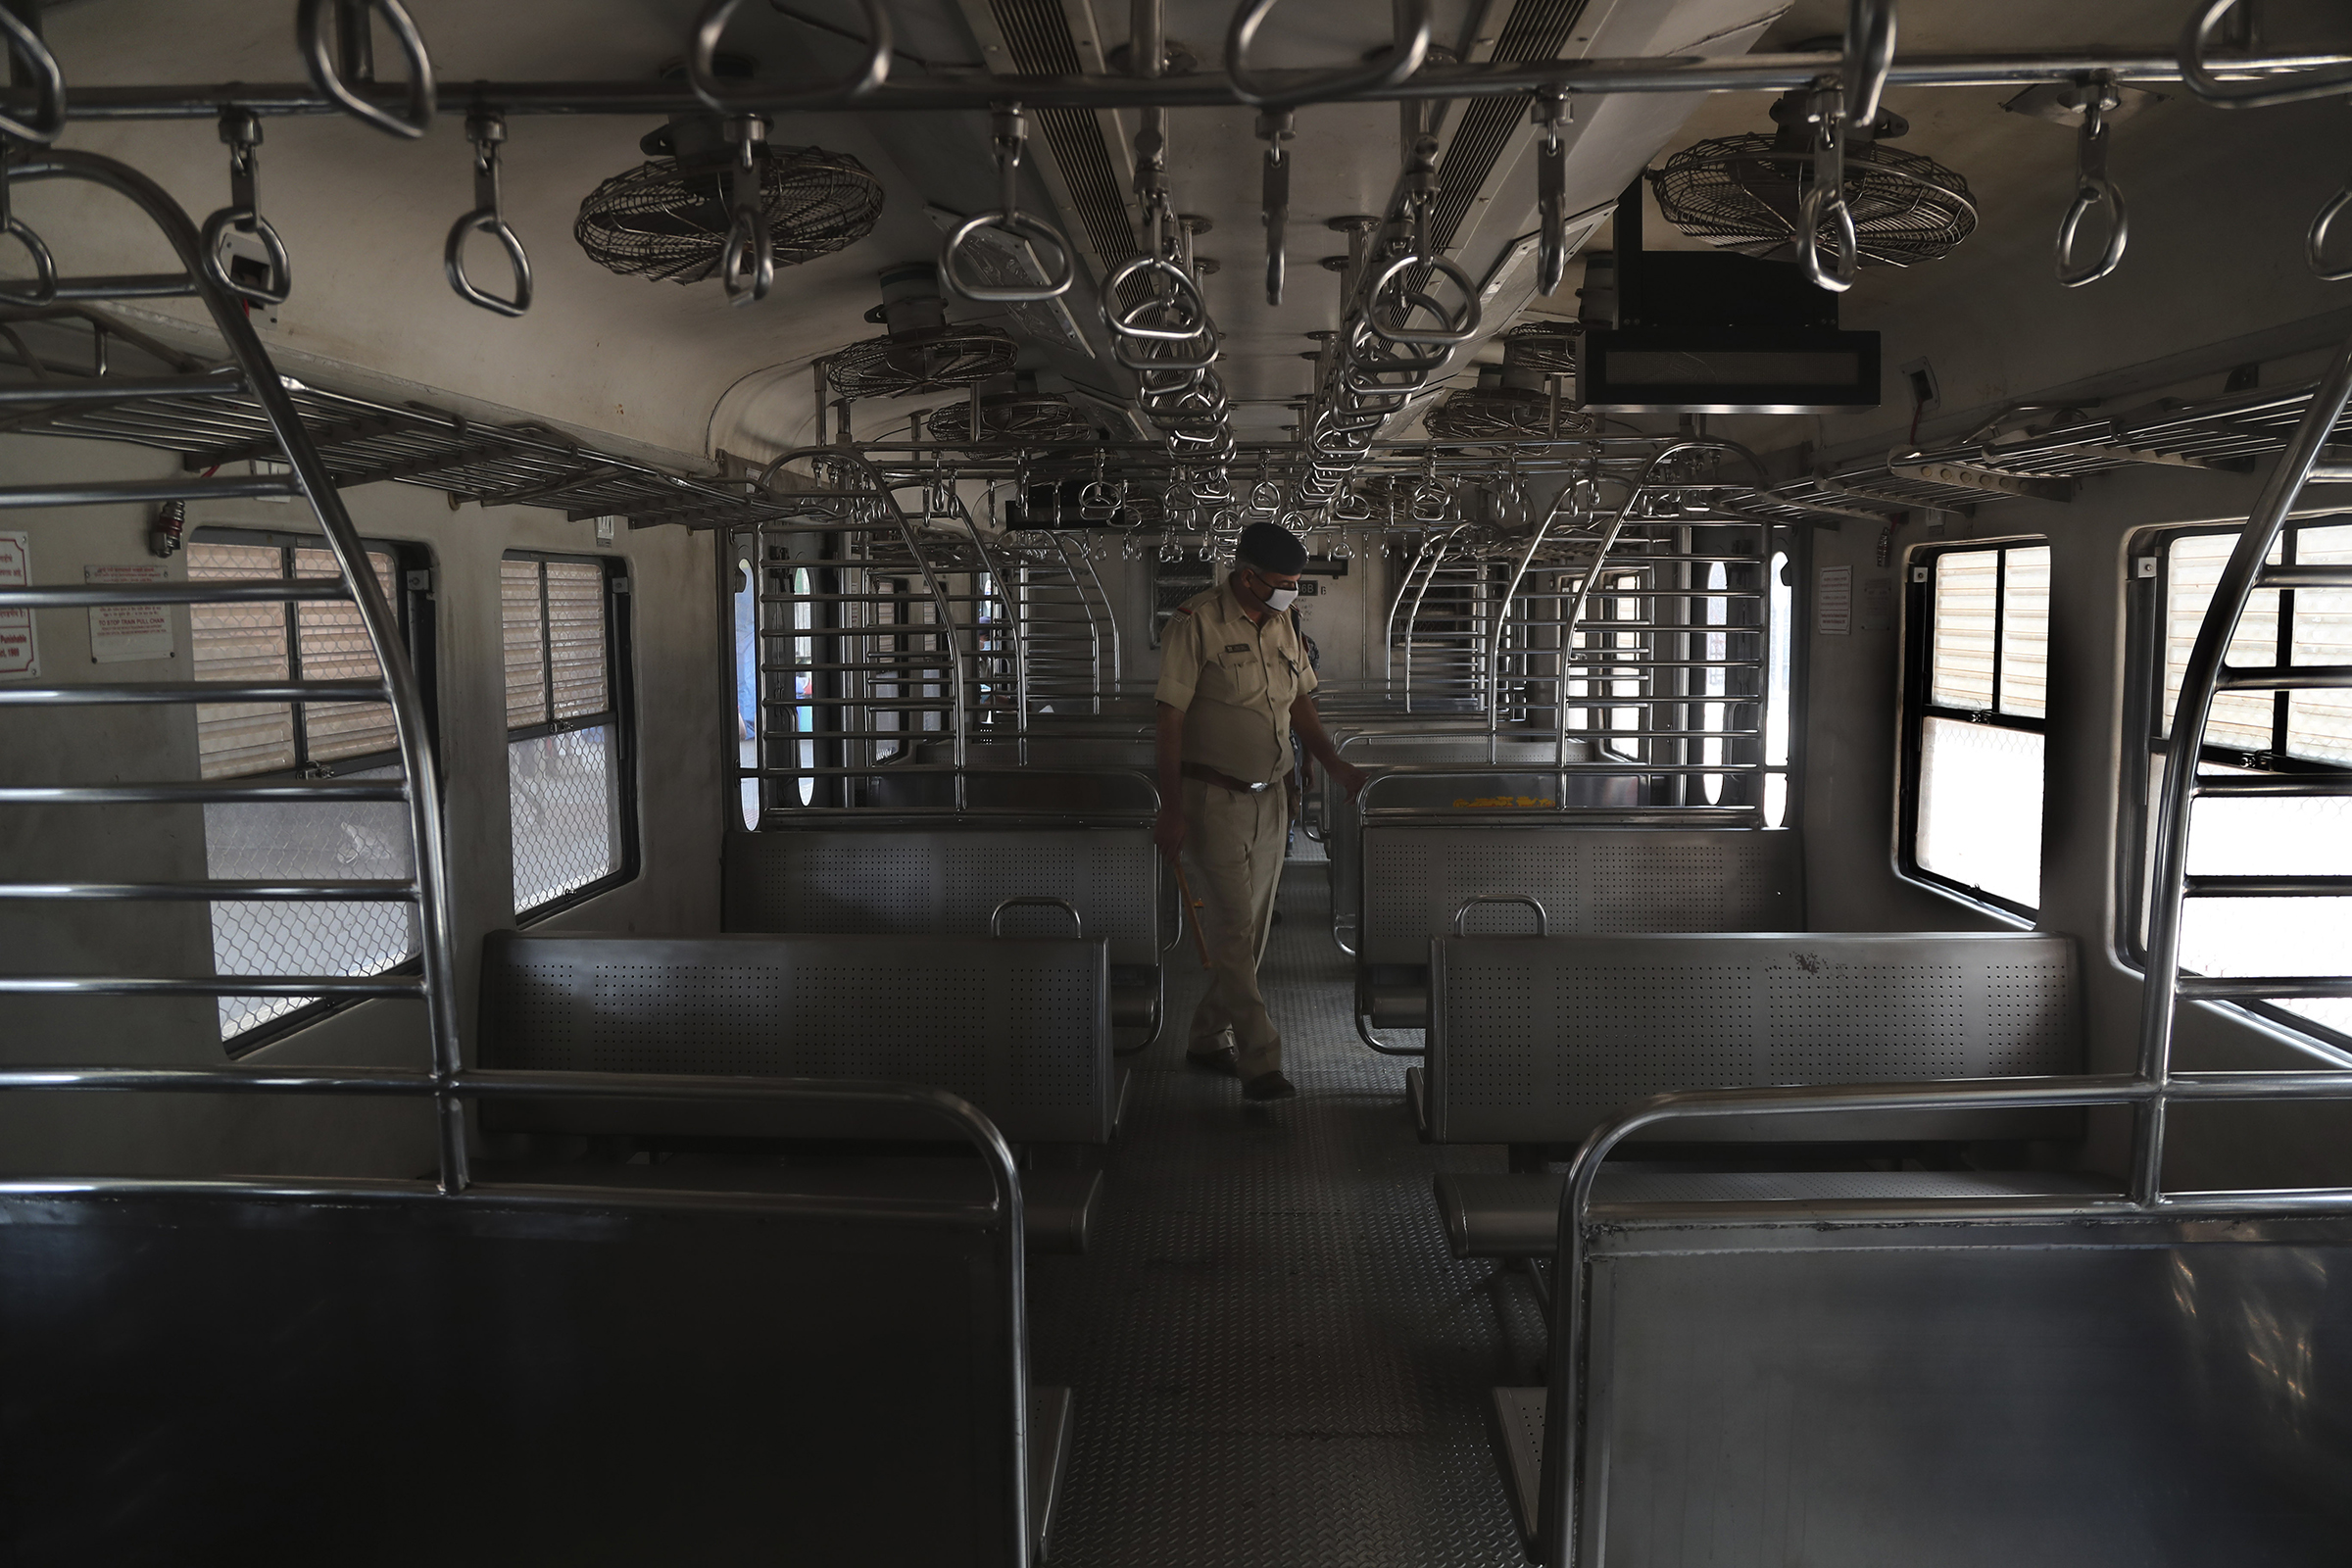 An Indian police officer wearing a mask checks a suburban train before they are locked down in Mumbai, India, on March 23, 2020.